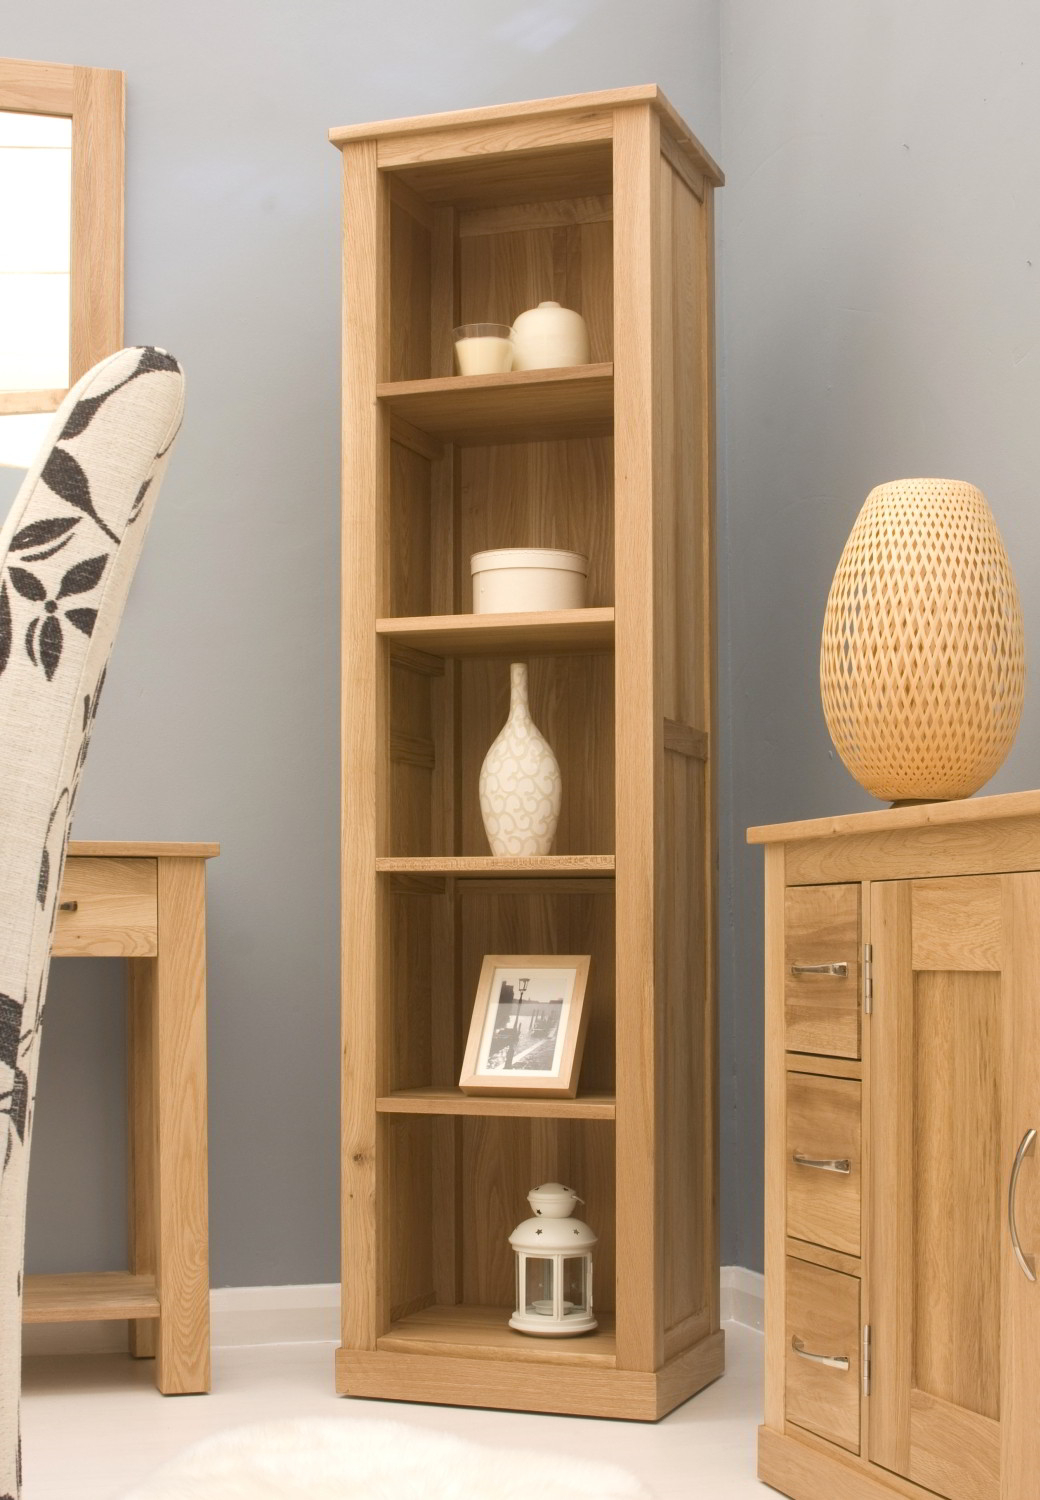 Details About Conran Solid Oak Modern Furniture Narrow Living Room Office Bookcase pertaining to measurements 1040 X 1500